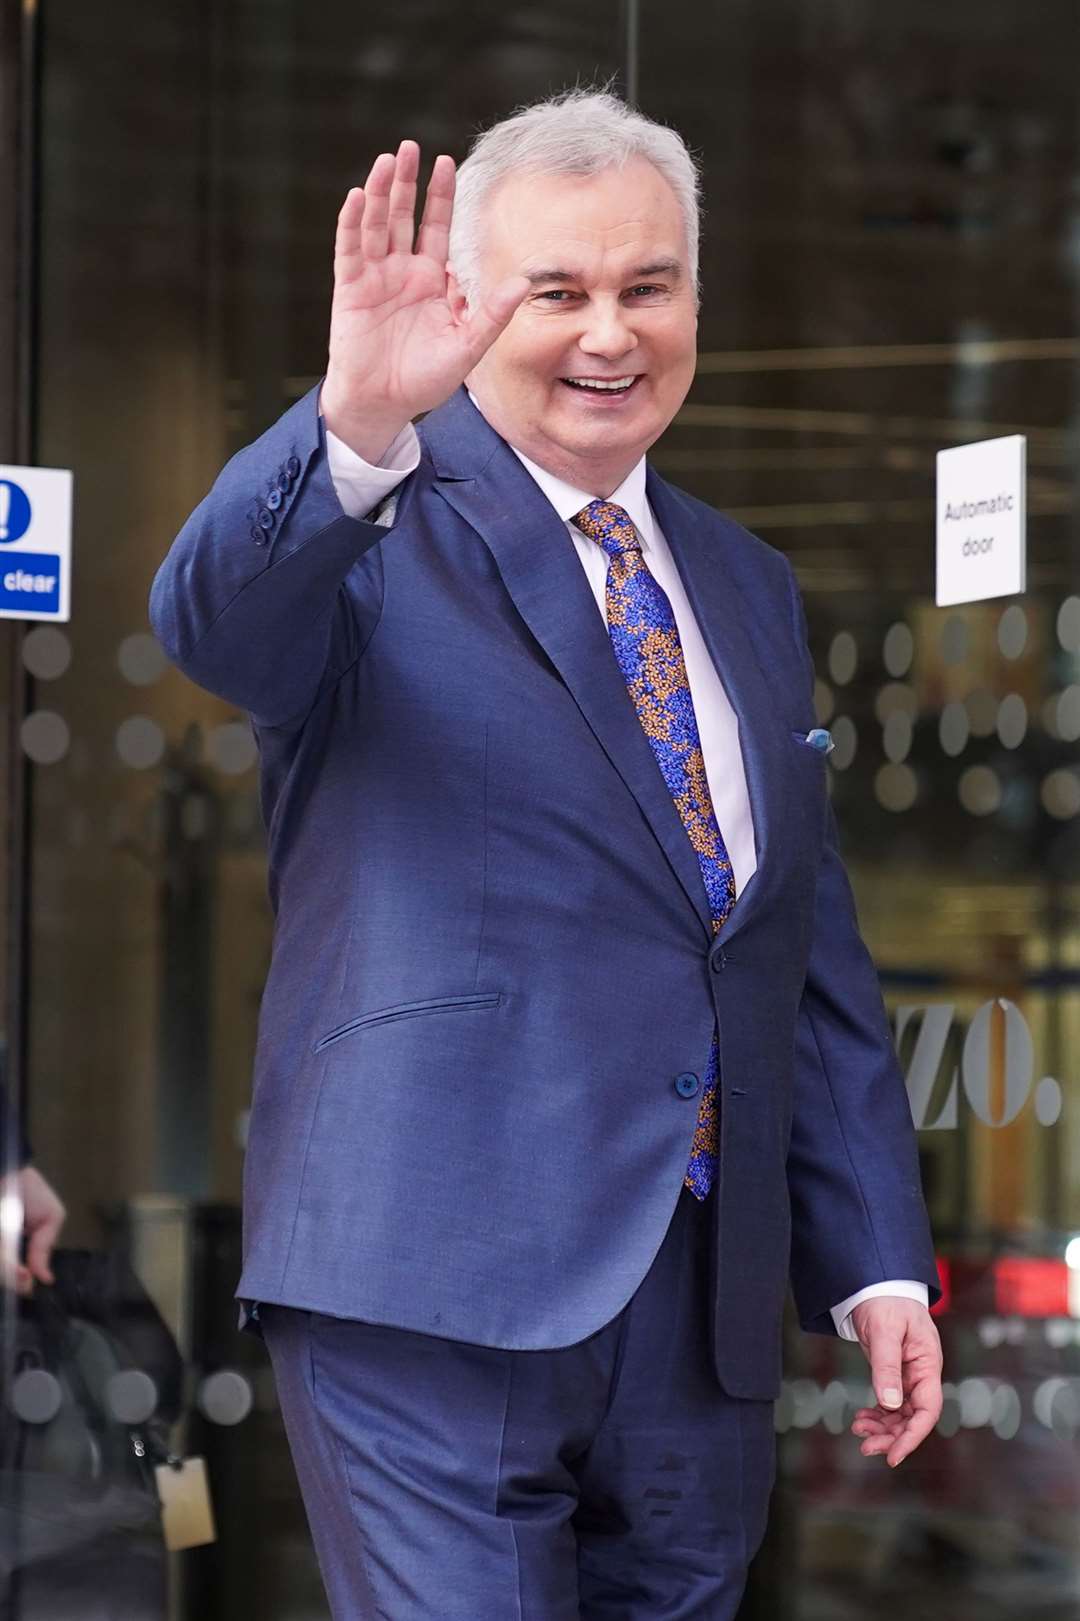 Eamonn Holmes leaves the offices of GB News (Kirsty O’Connor/PA)